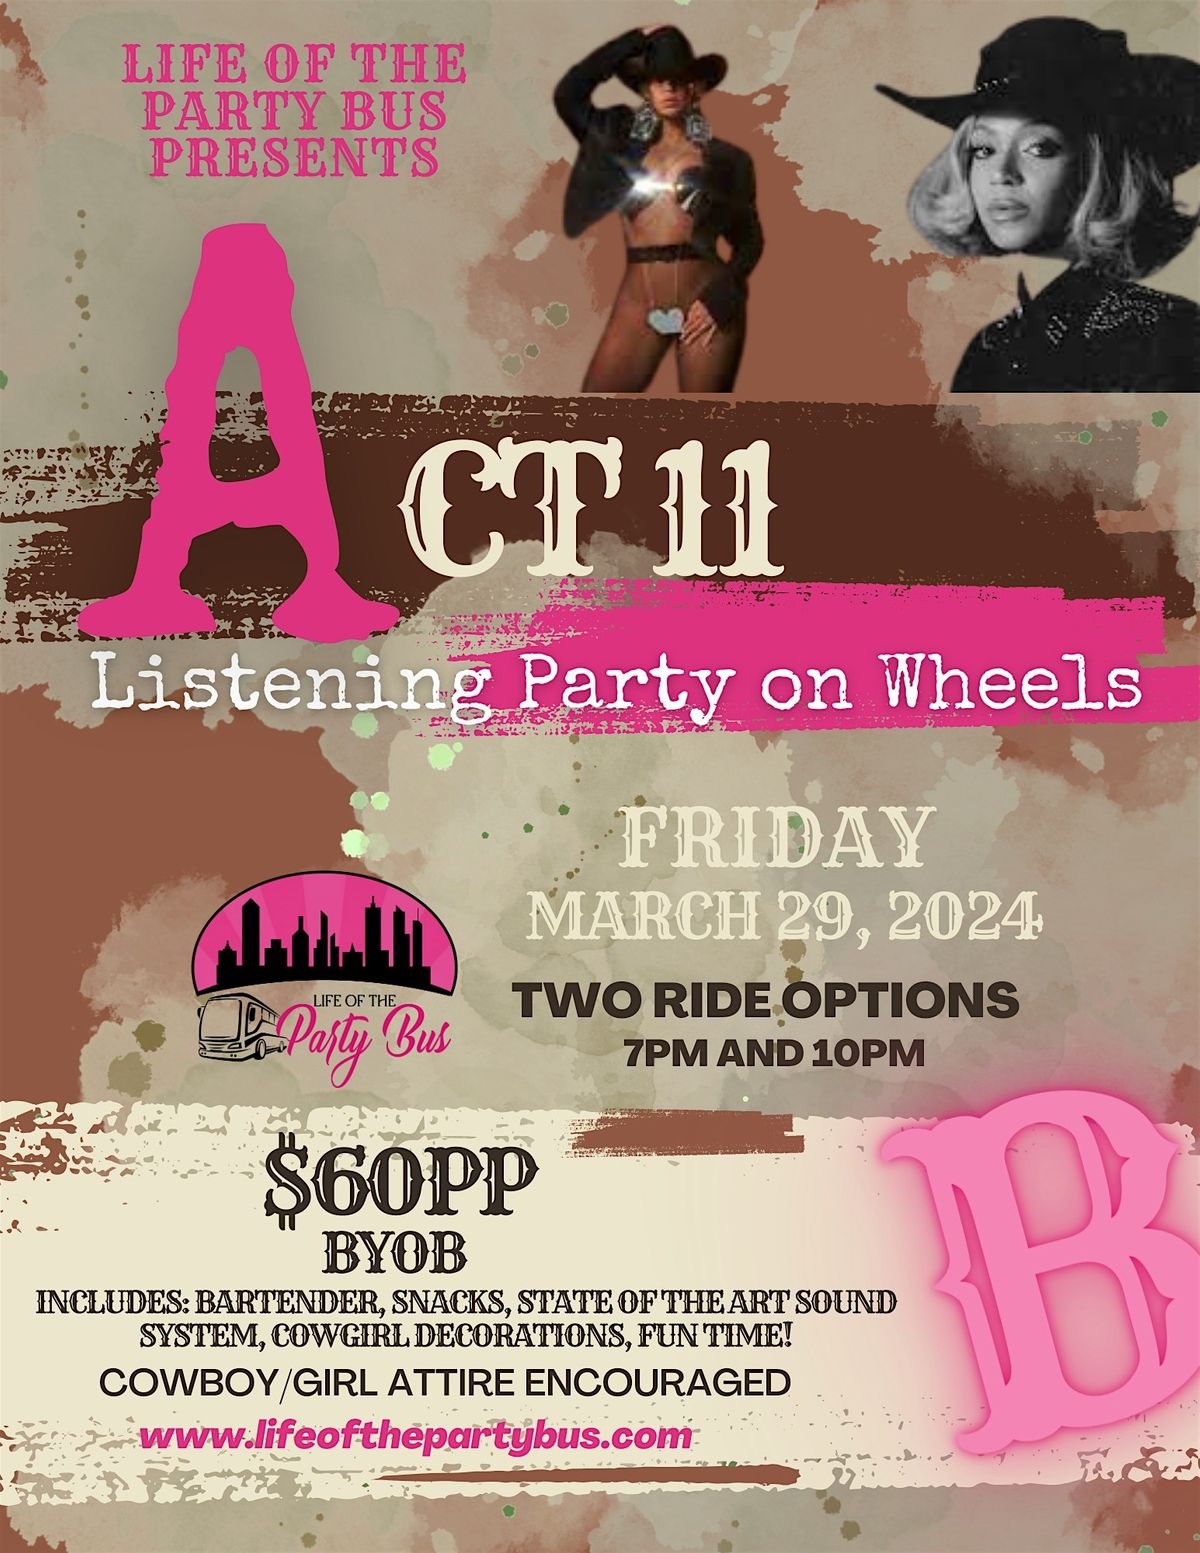 Act ll- Beyonce Listening Party on Wheels